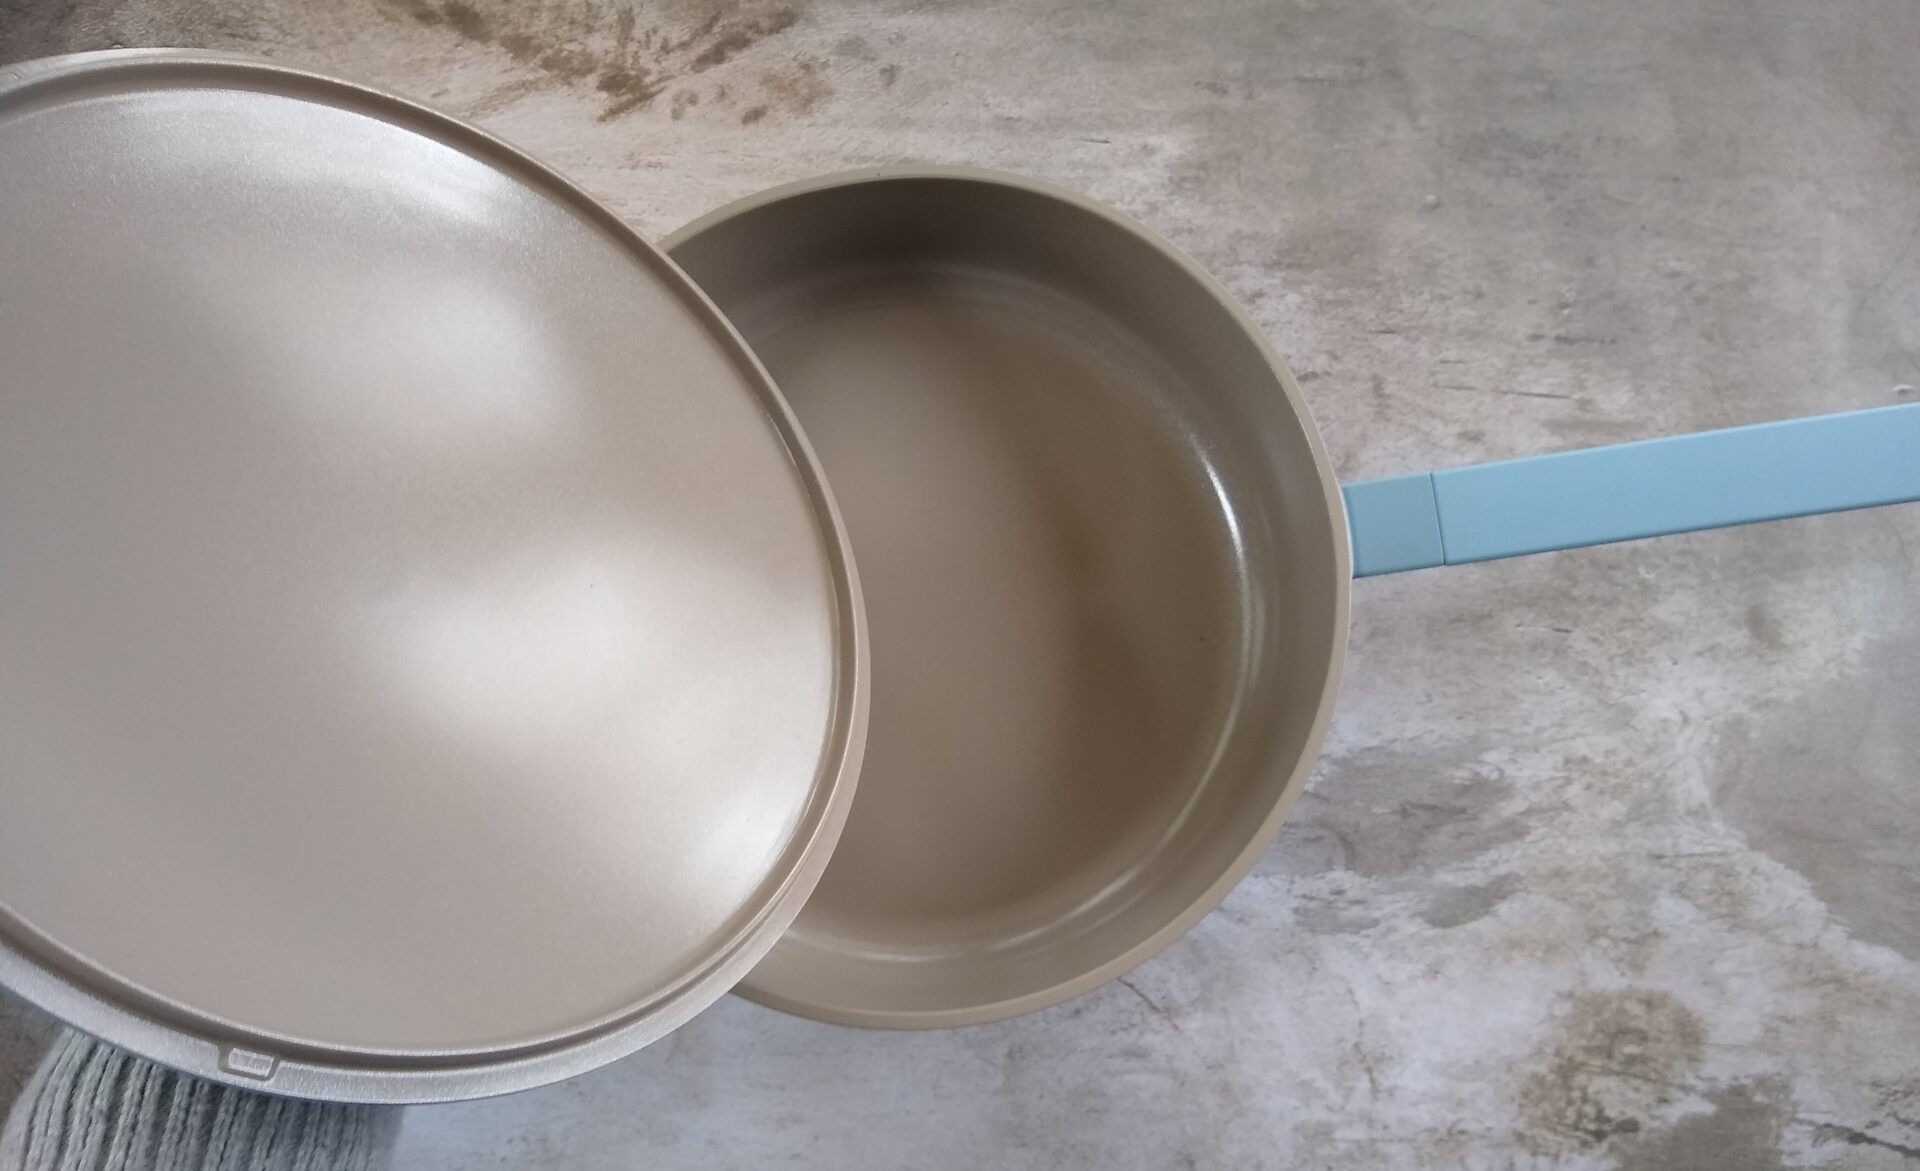 User-Friendly and Easy to Maintain Crofton Cookware 